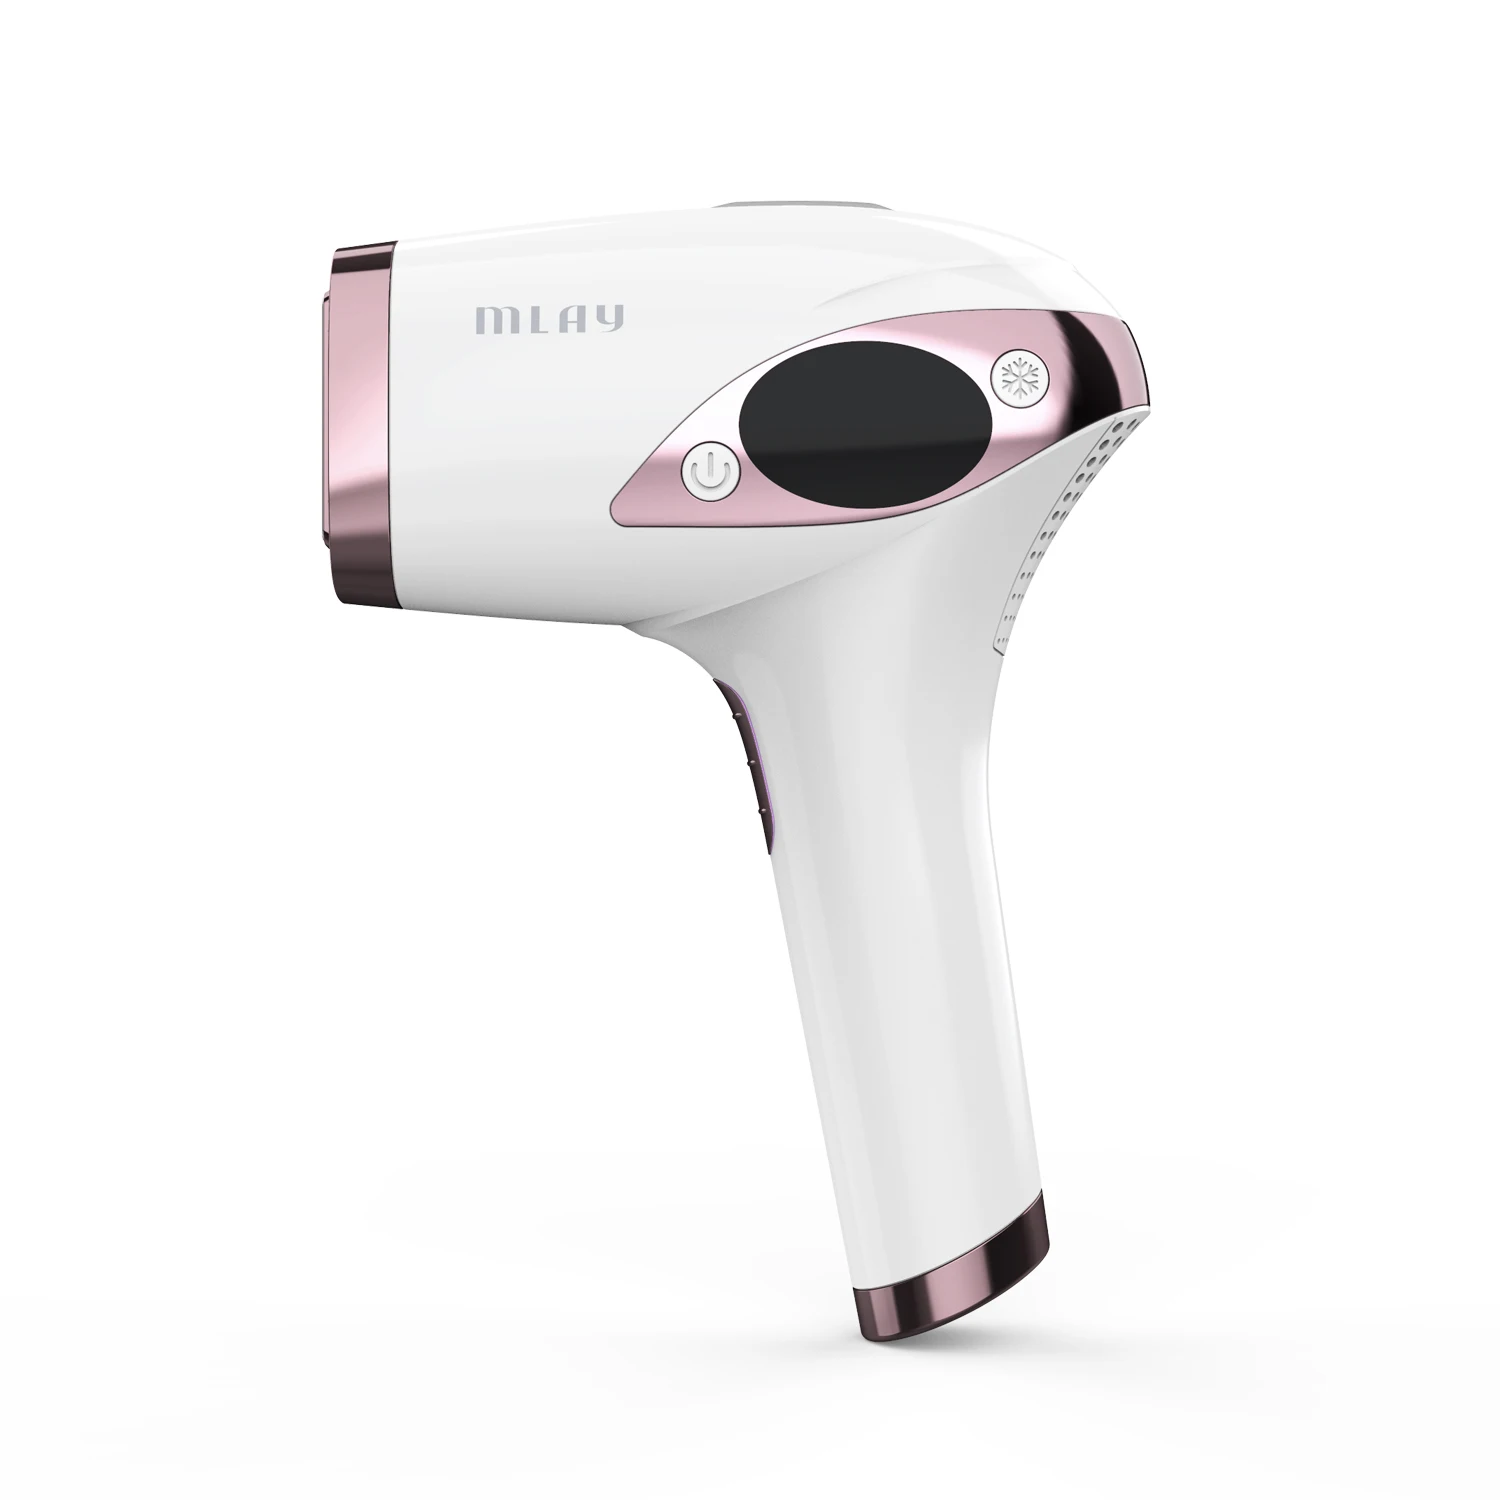 MLAY Custom Portable IPL Laser Hair Removal Machine US Plug Type for Home Use in Ice Cooling Beauty Devices